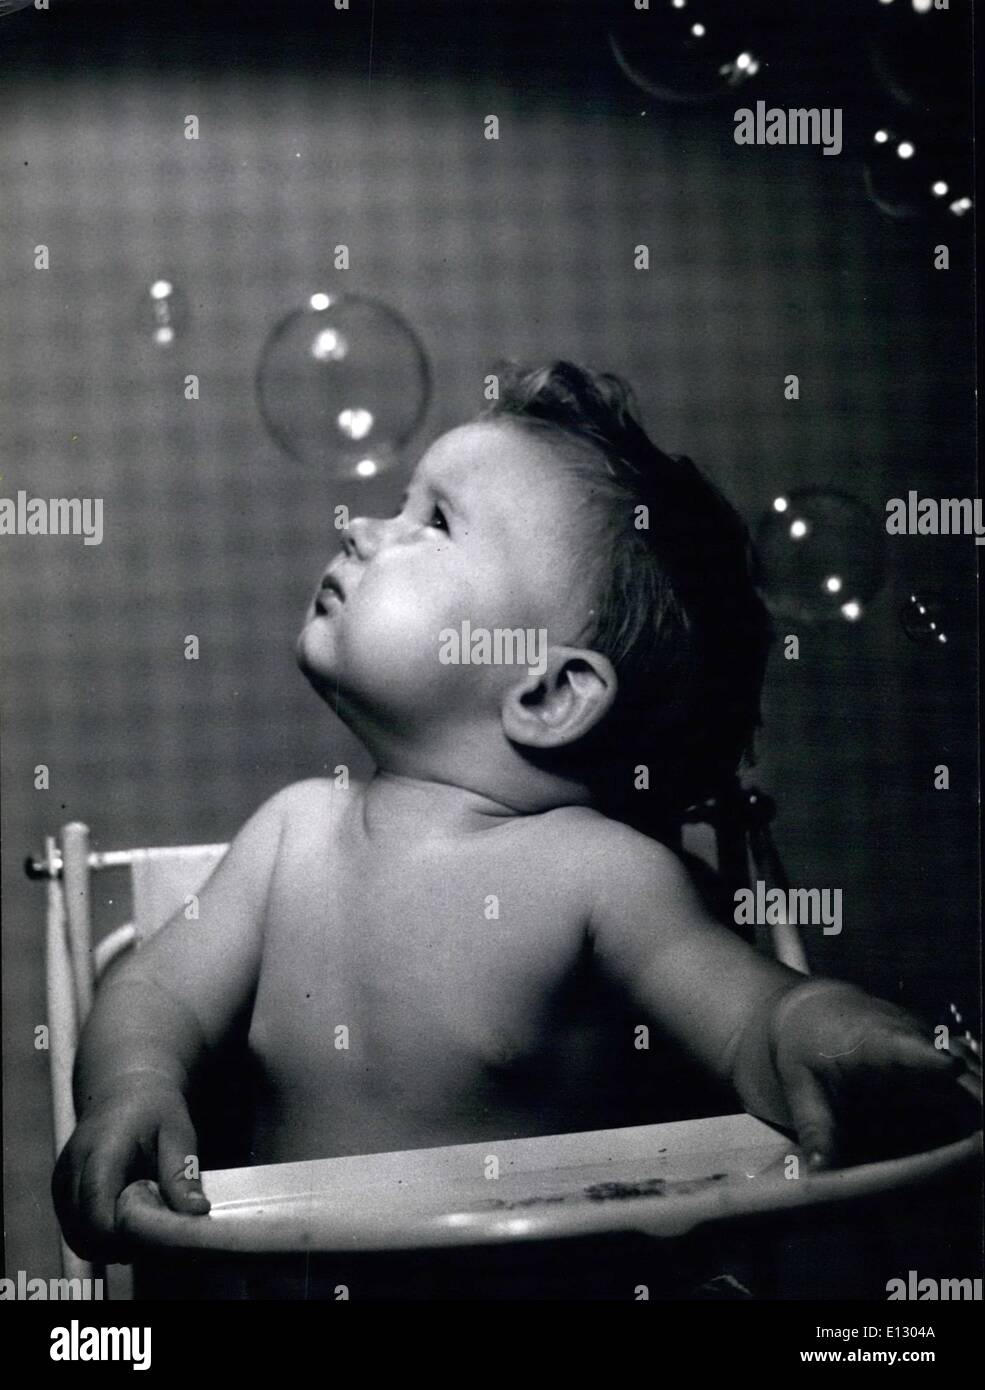 Feb. 26, 2012 - There they go floating up to the ceiling. First they are one side then another. Watching bubbles is a full time Stock Photo